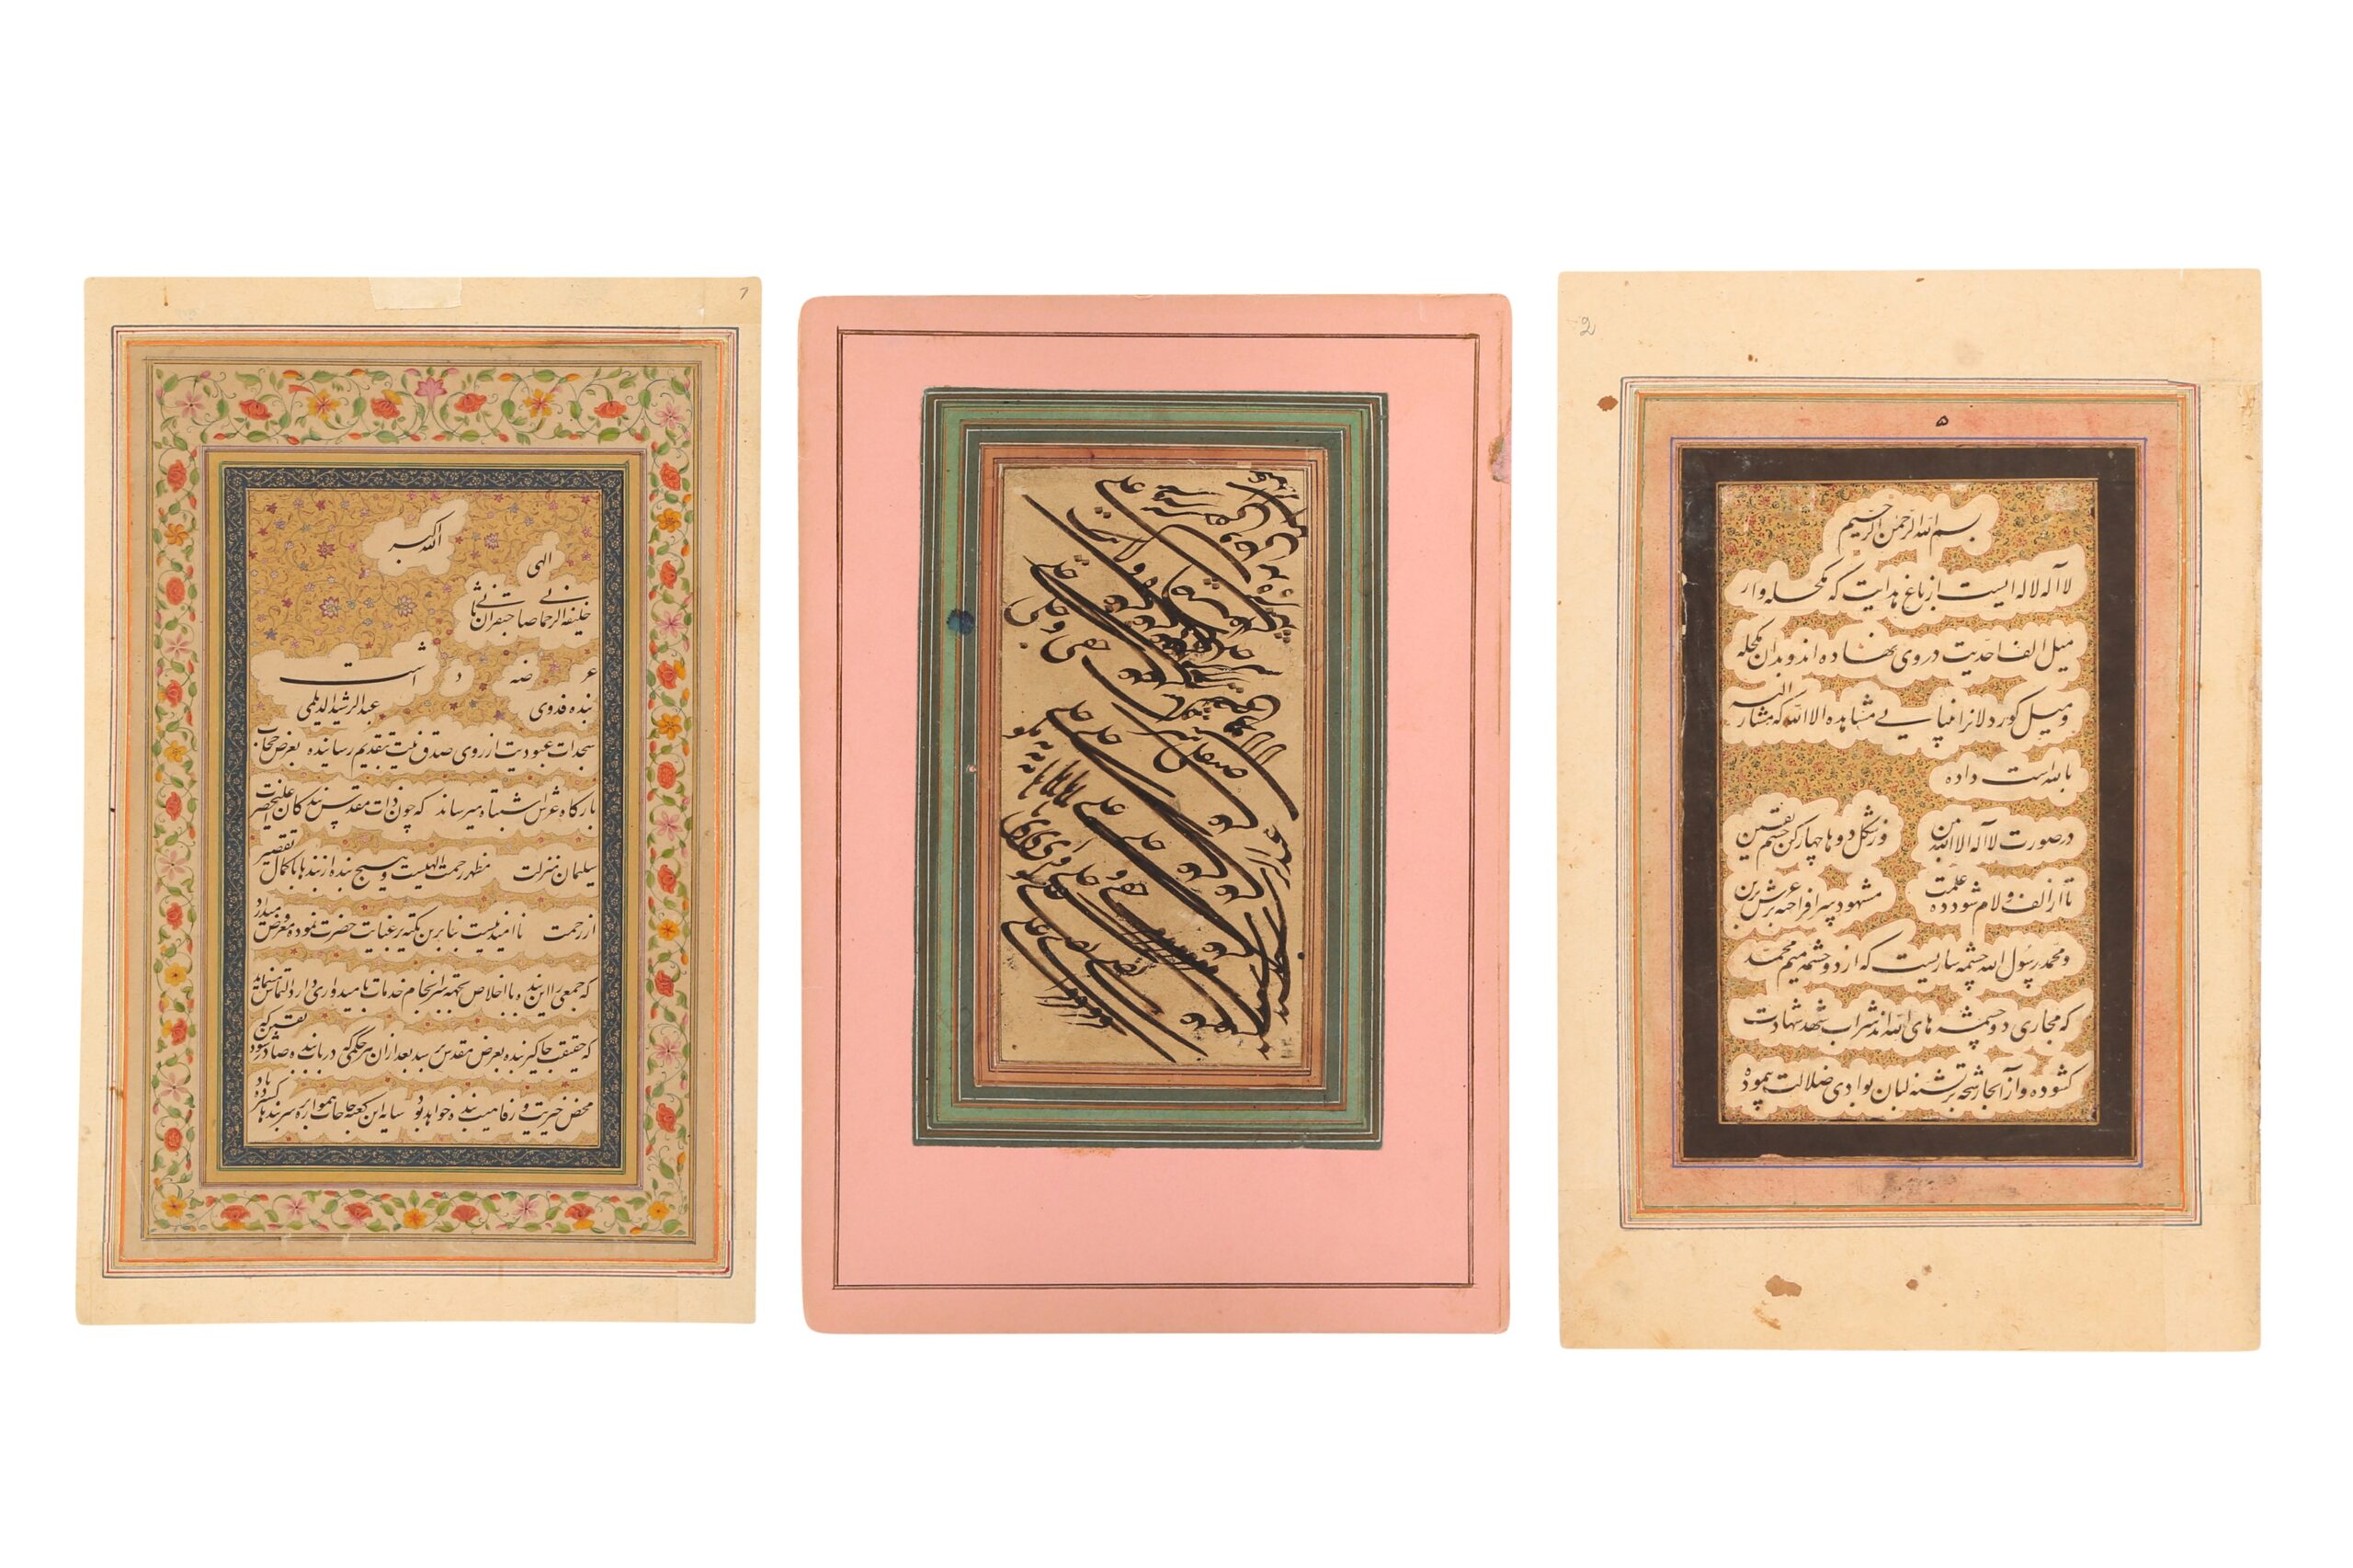 Lot 104. THREE MURAQQA' ALBUM PAGES WITH CALLIGRAPHIC COMPOSITIONS Mughal India, 17th century and later. Sold for £9,375